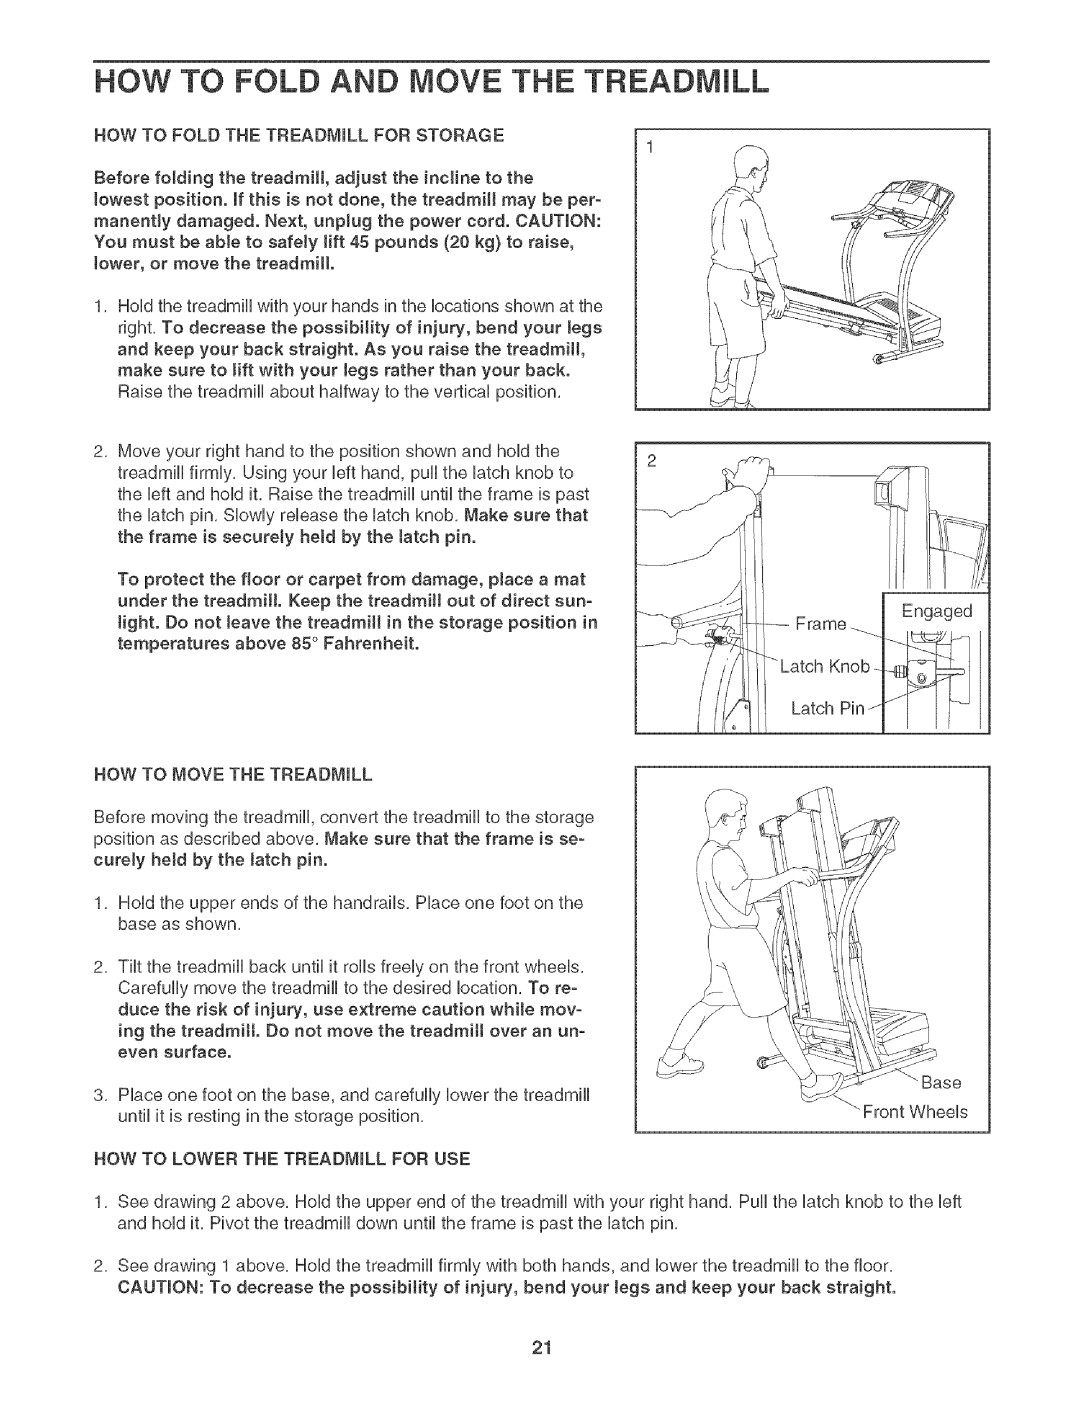 Sears 831.29506 HOW to Fold and Move the Treadmill, HOW to Move the Treadmill, HOW to Lower the Treadmill for USE 